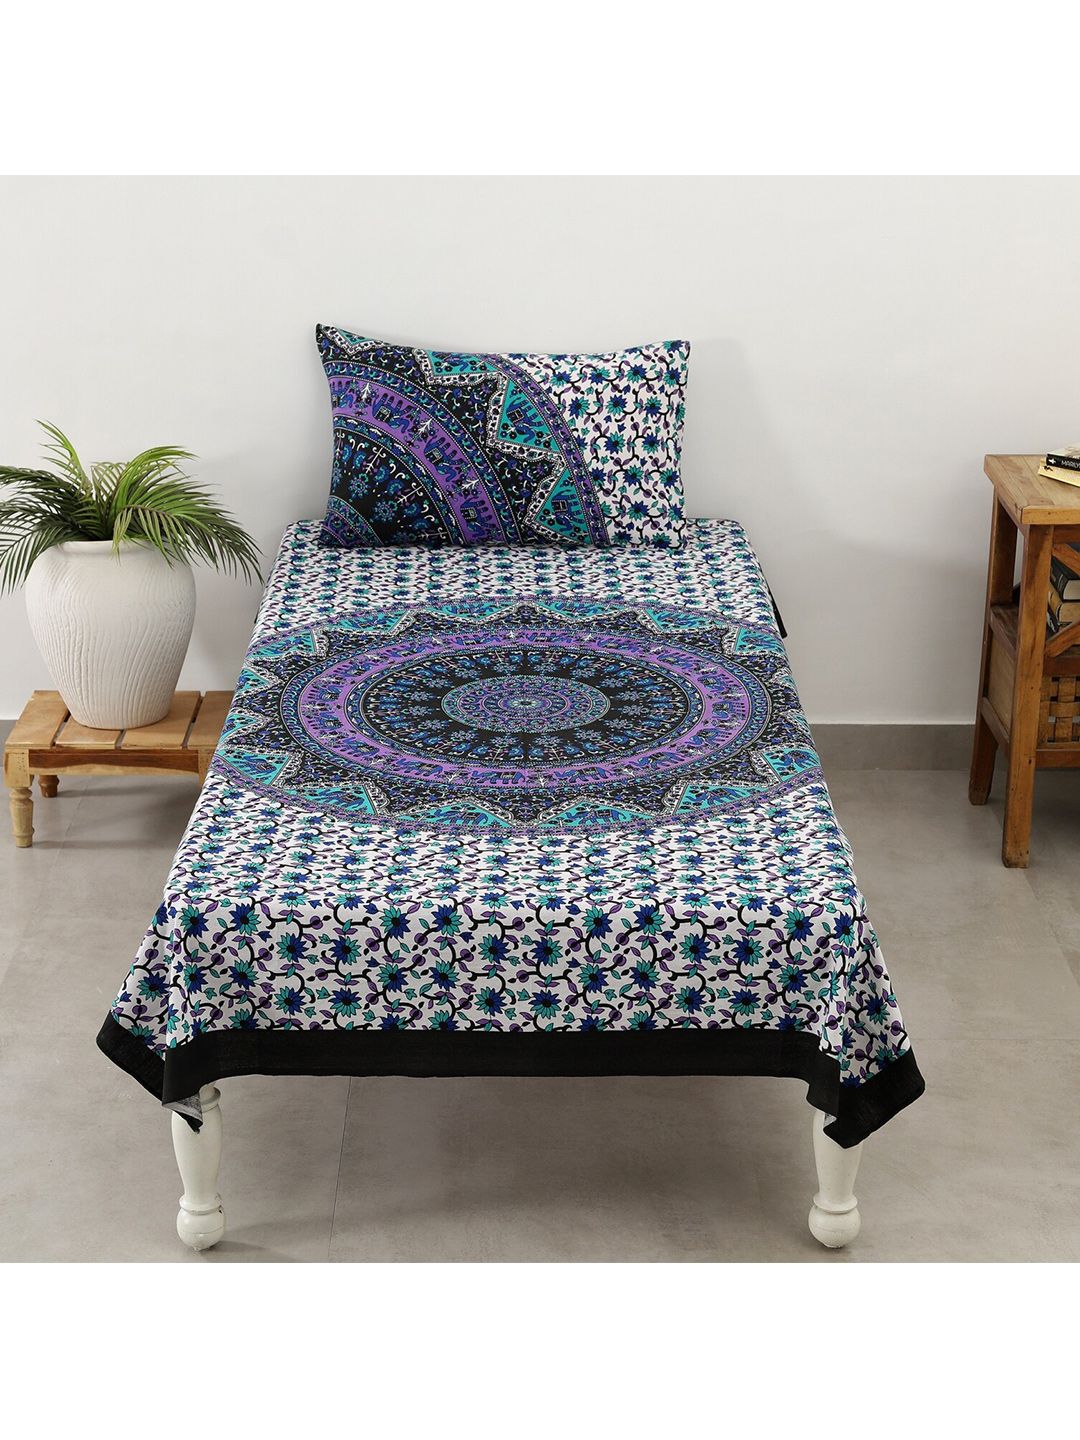 HANDICRAFT PALACE Purple & Green Ethnic Motifs 144 TC Single Bedsheet with 1 Pillow Covers Price in India